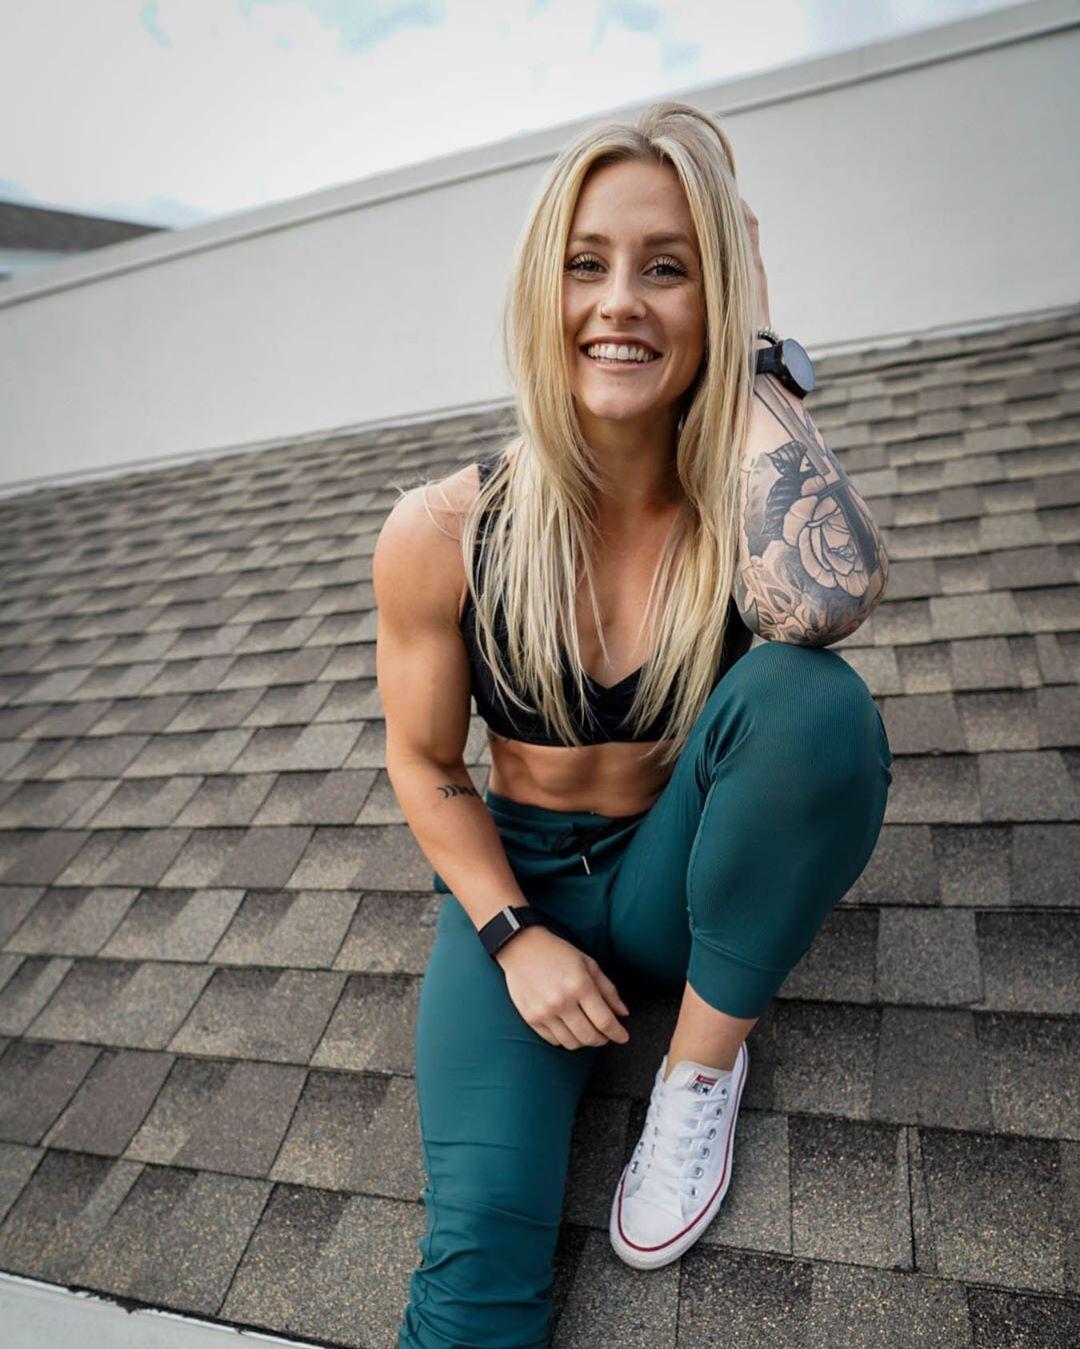 51 Hot Pictures Of Josie Hamming That Will Fill Your Heart With Joy A Success | Best Of Comic Books